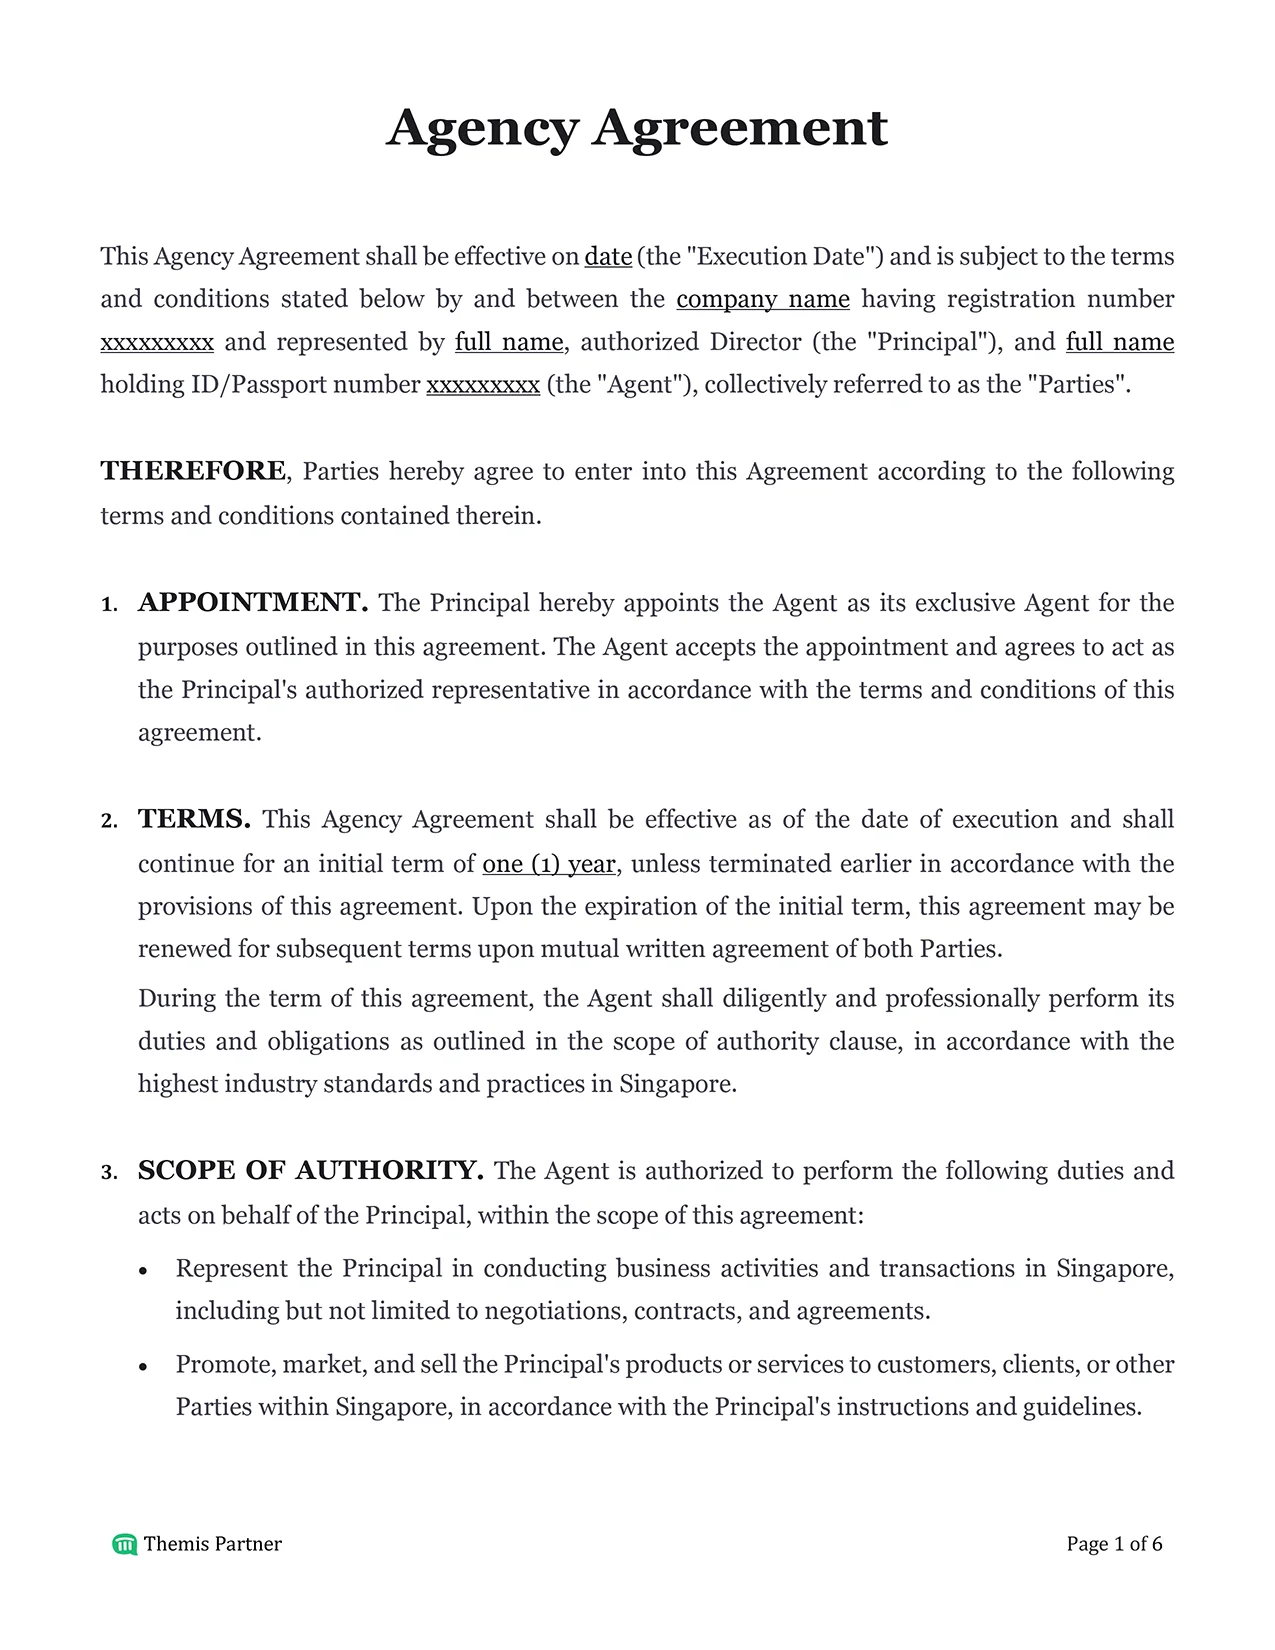 Agency agreement Singapore 1